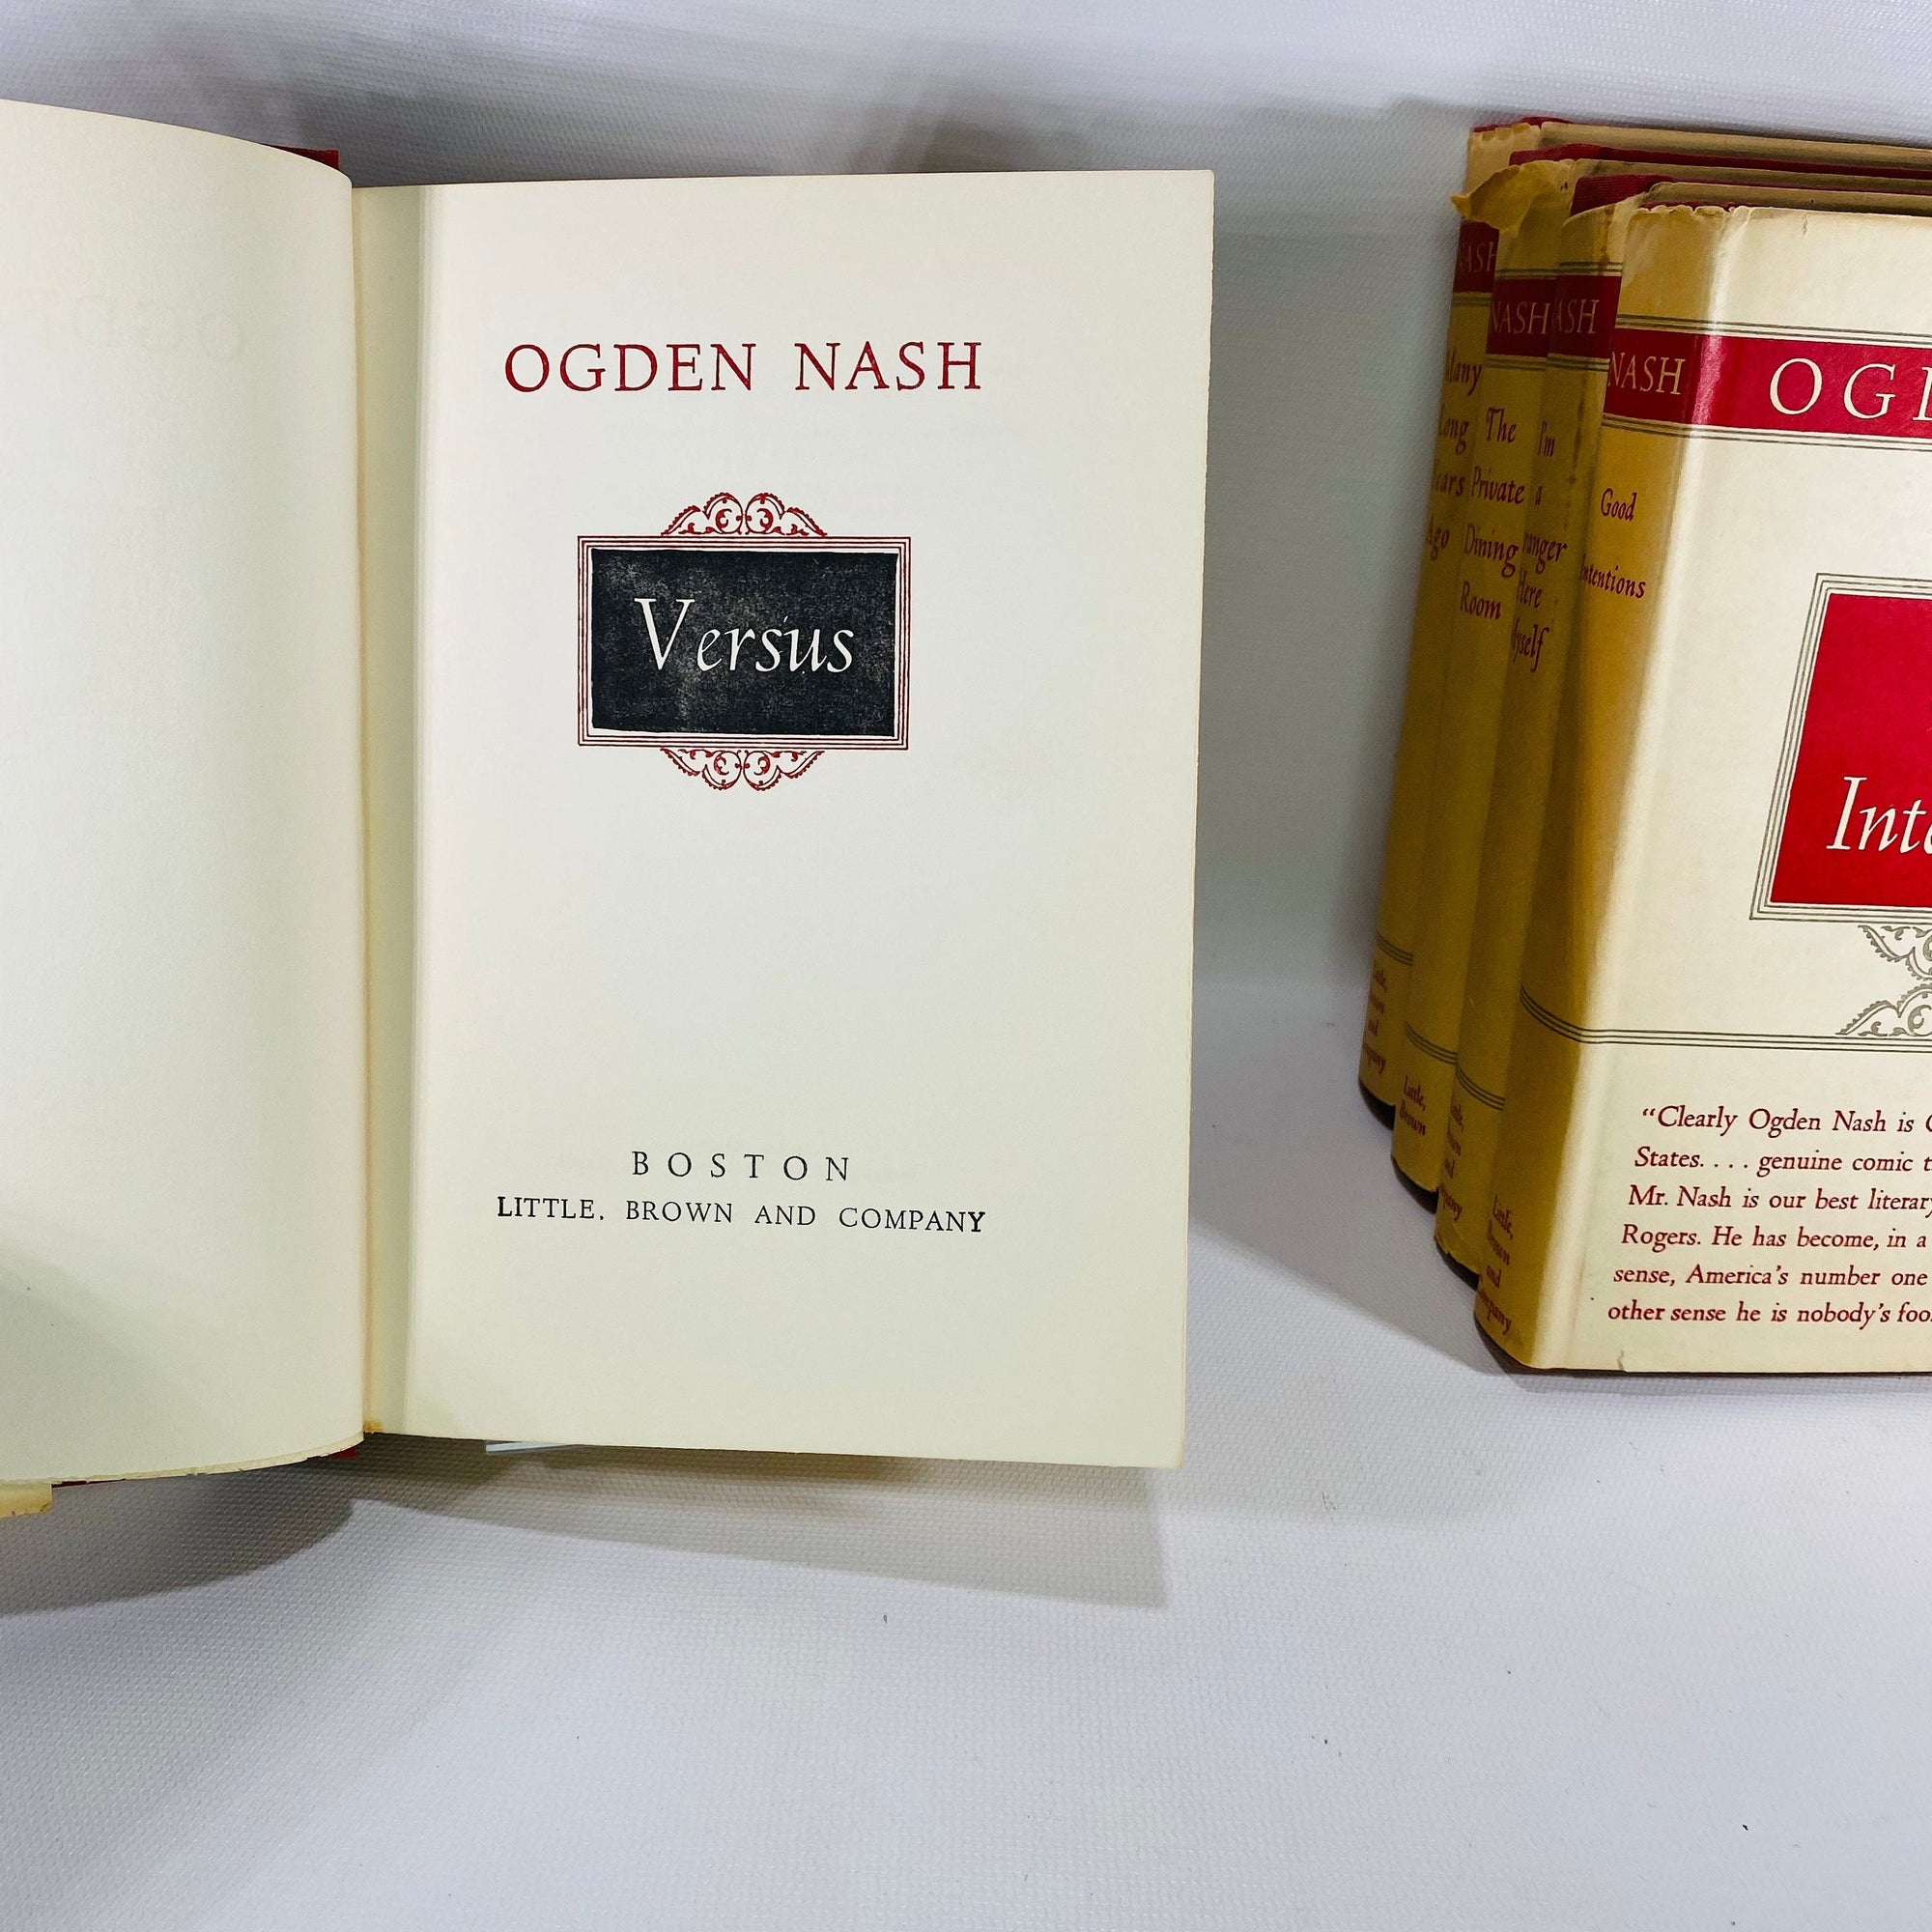 5 Ogden Nash Books Good Intentions 1942 Versus 1949 Im A Stranger Myself 1938 The Private Dining Room 1953  Many Years Ago 1945 Little Brown